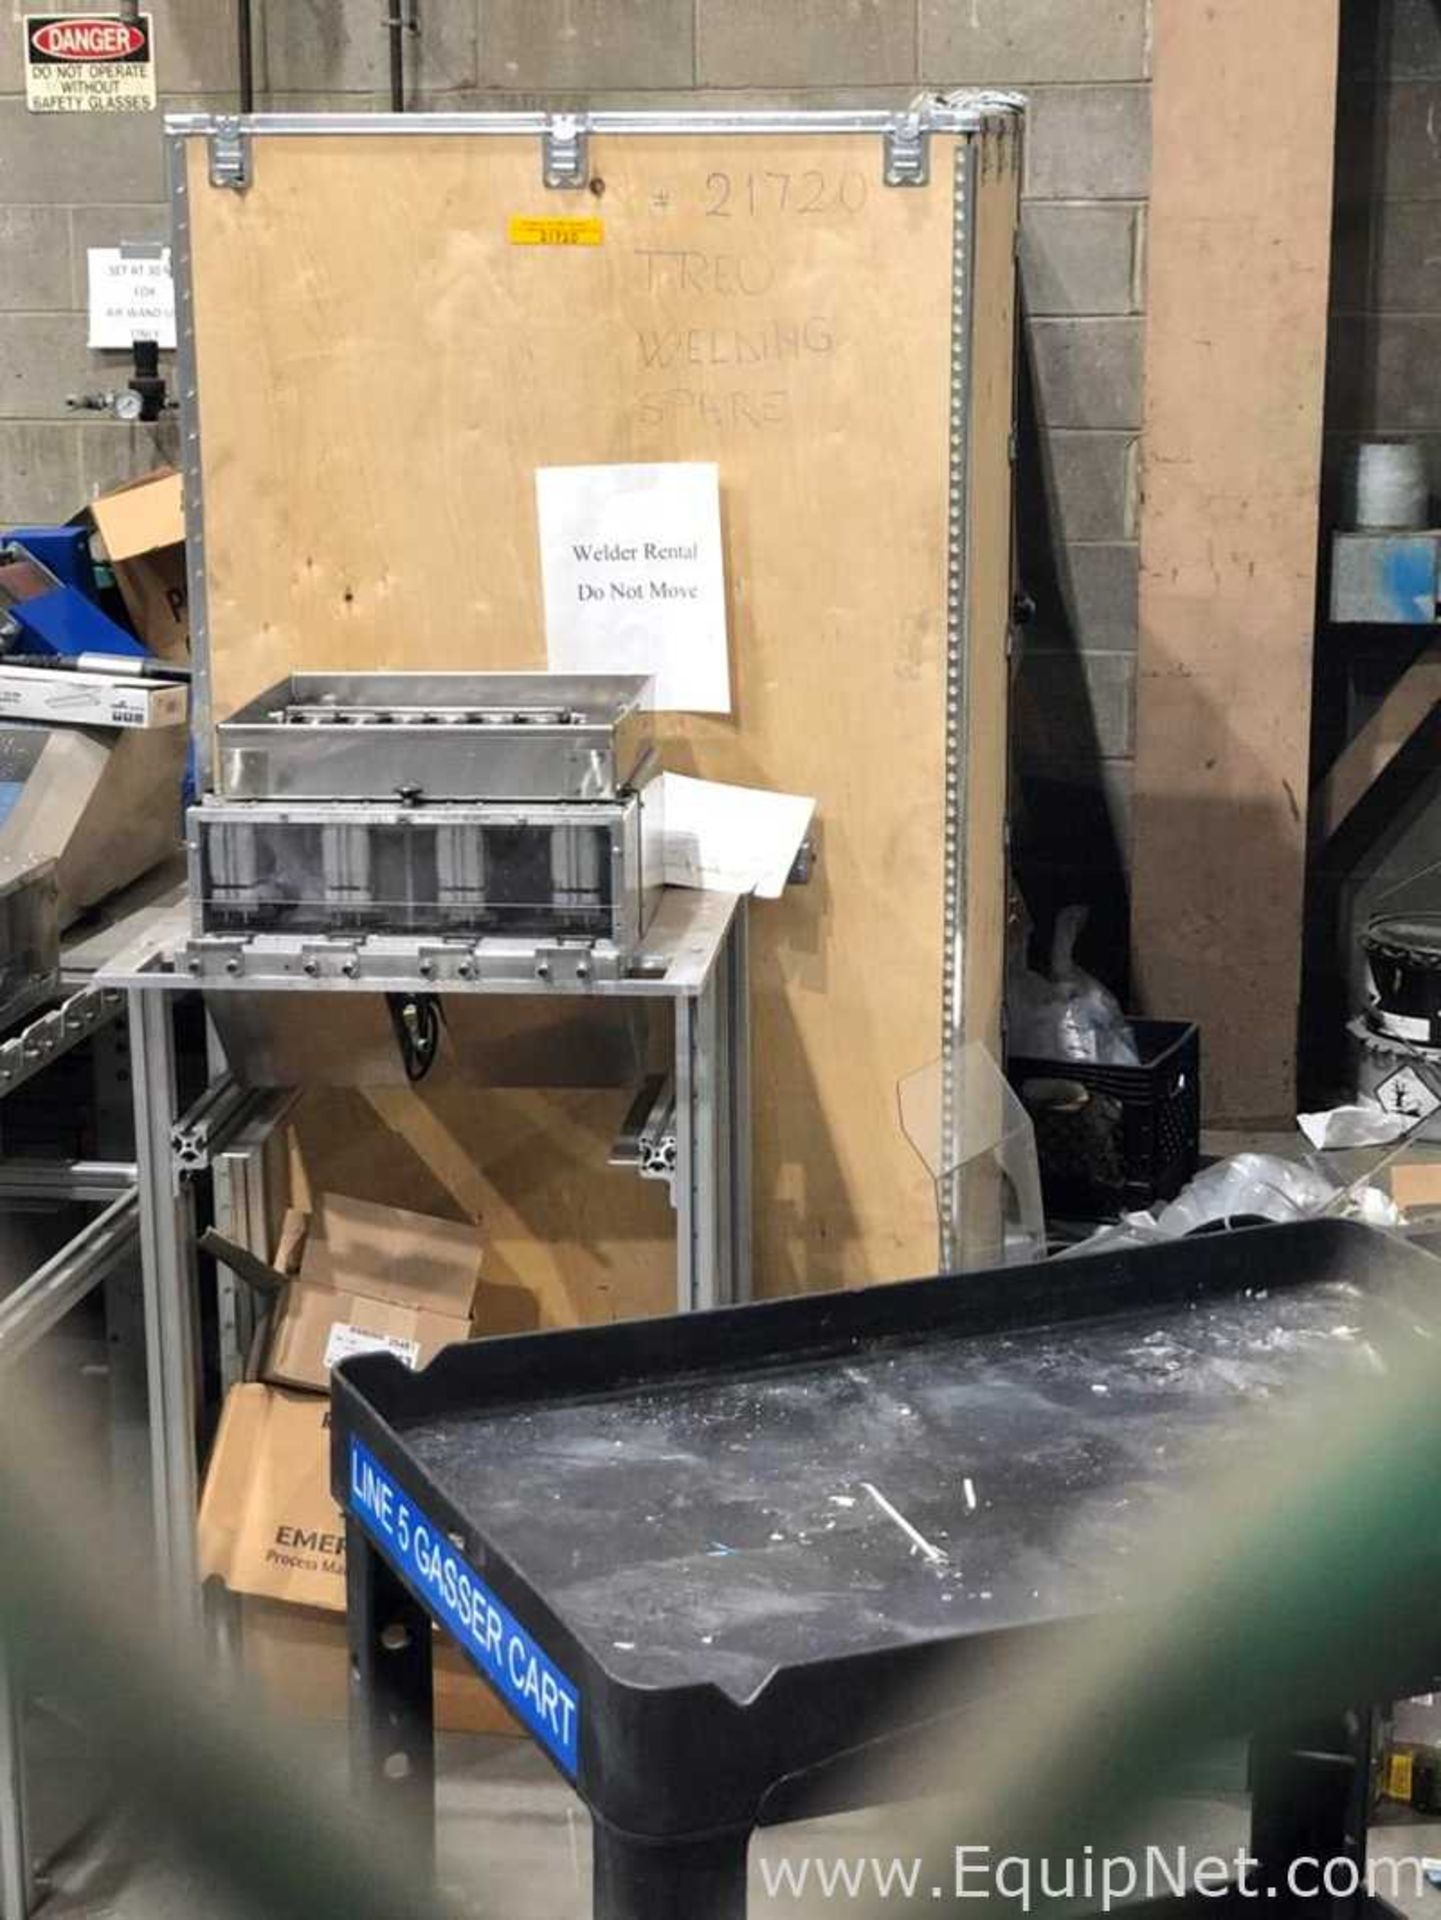 Unused Dukane iQ Sevo Ultrasonic Welding Units And Controller NEW IN CRATE - Image 3 of 5